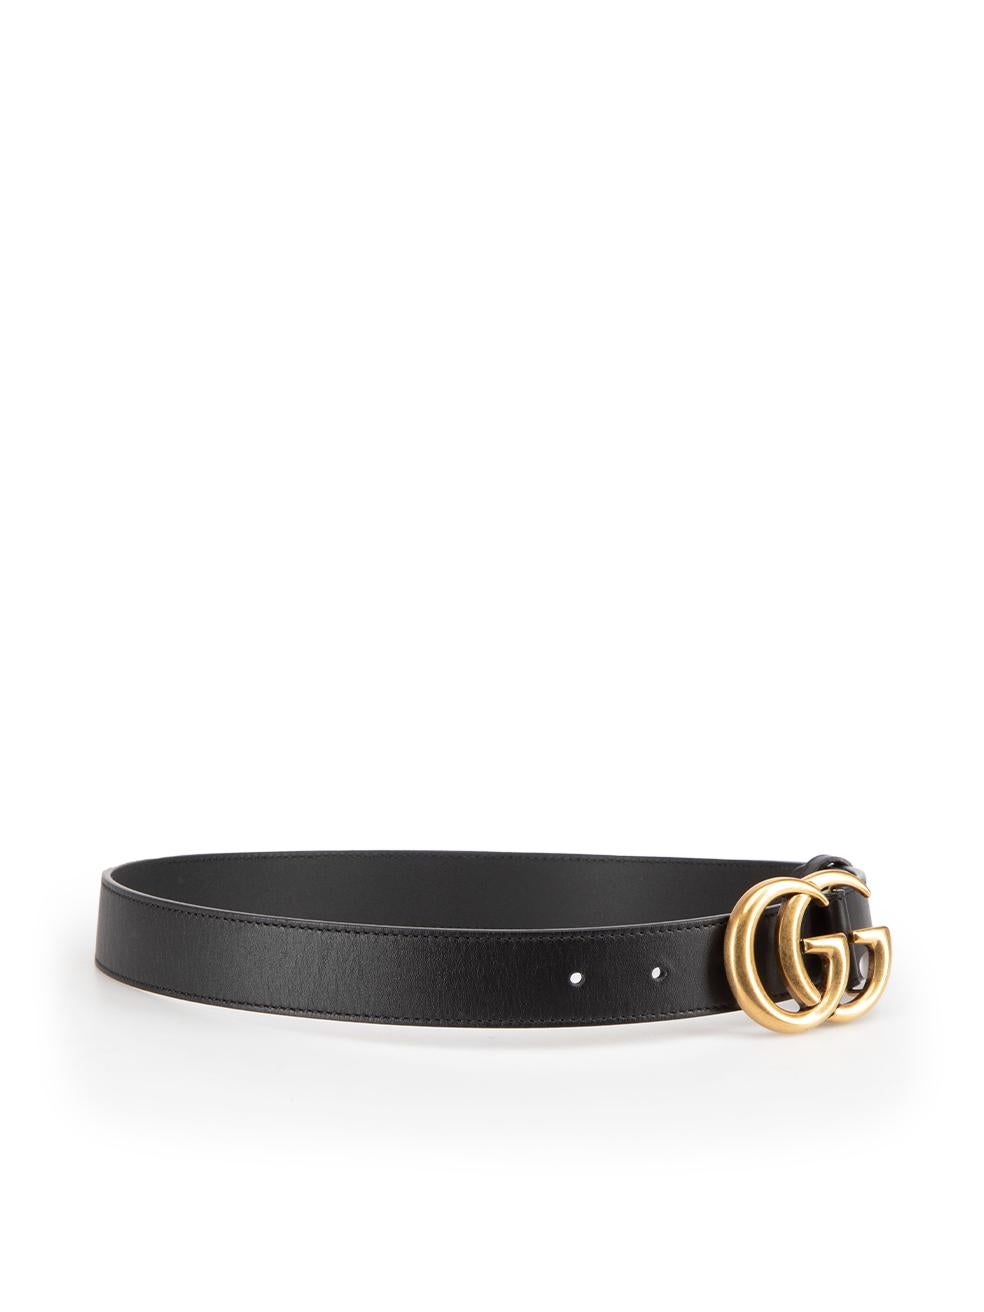 CONDITION is Very good. Minimal wear to the belt is evident. Small scratches to the front near the logo and light tarnishing to the hardware on this used Gucci designer resale item.
 
 
 
 Details
 
 
 Black
 
 Leather
 
 Belt
 
 Gold GG buckle
 
 
